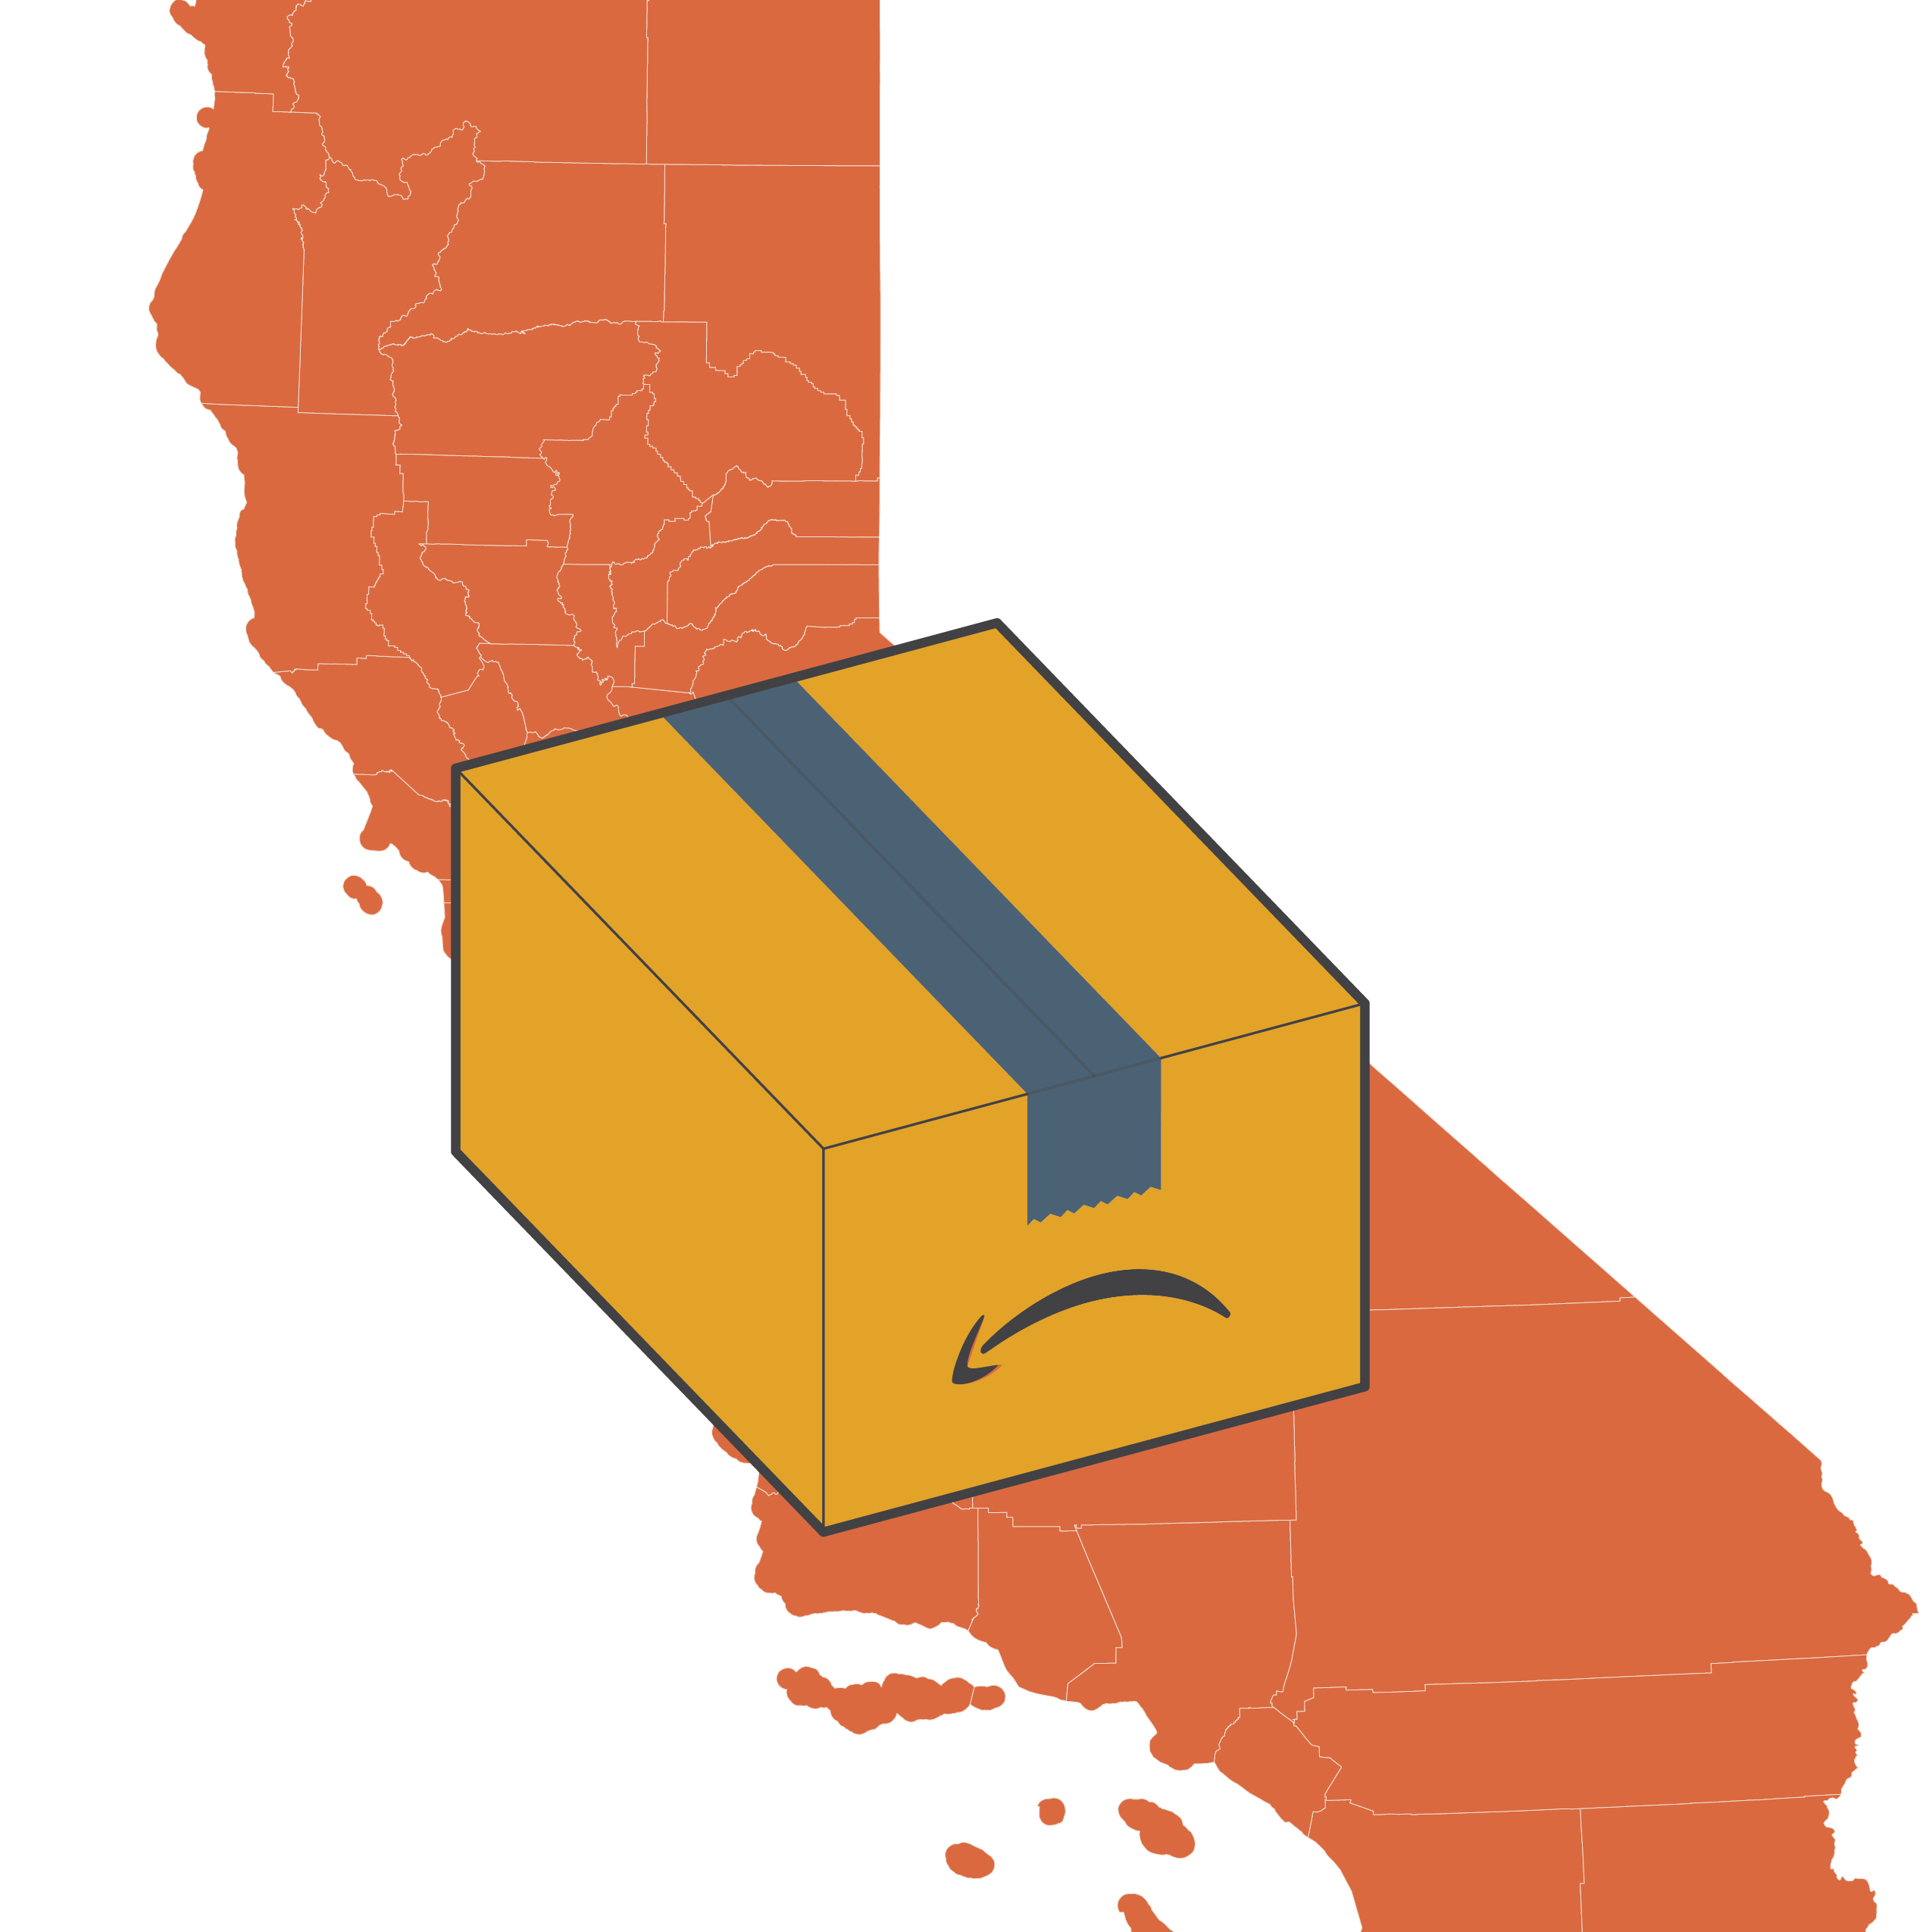 Amazon: A Question of Distribution